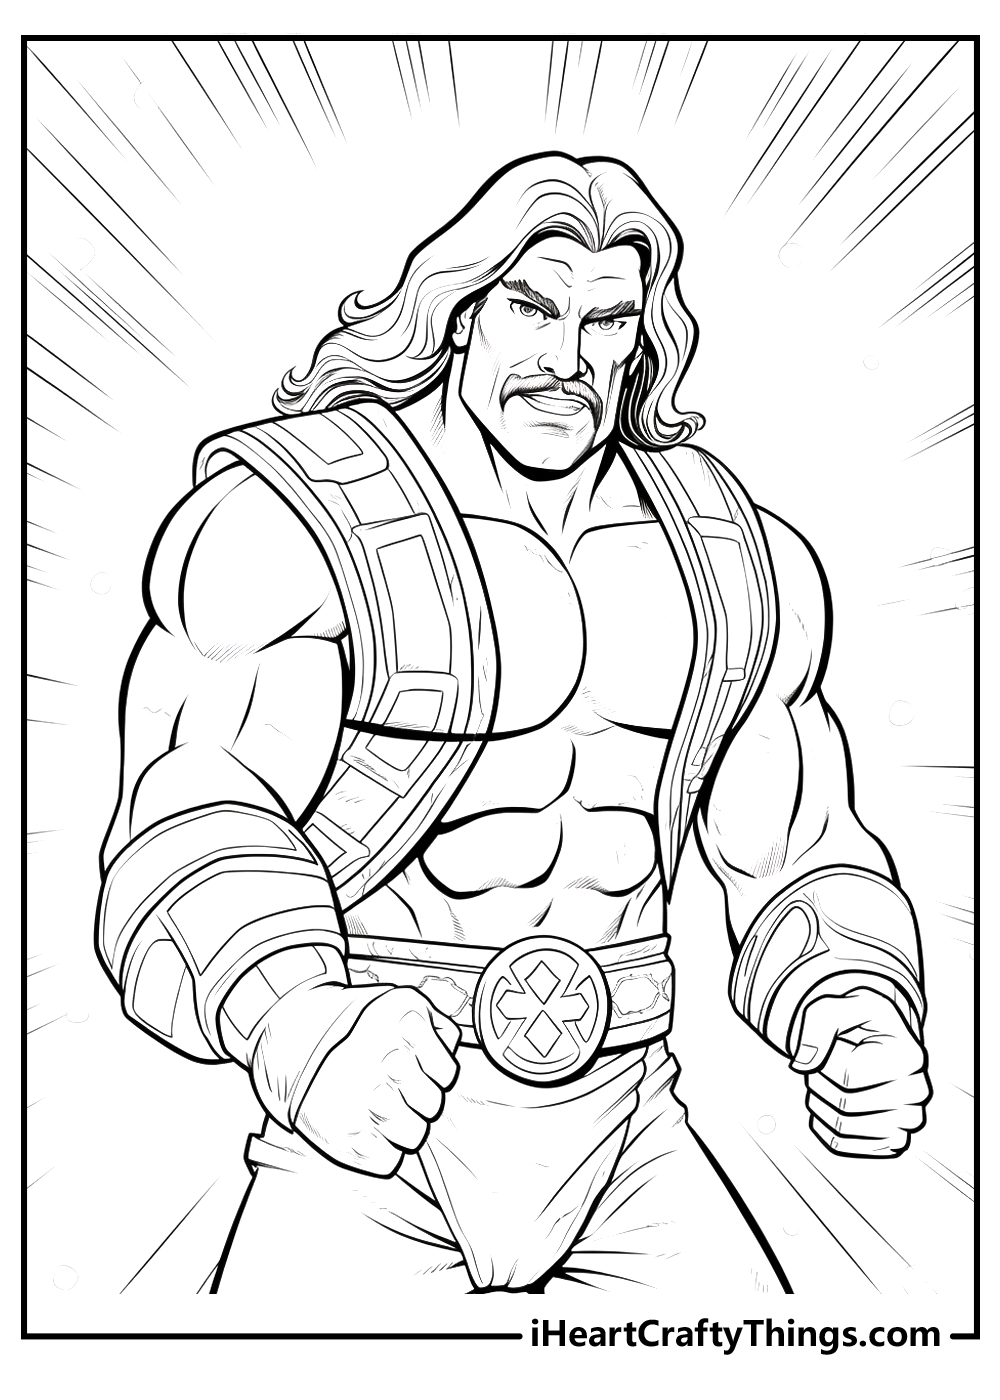 Wwe coloring pages free printables